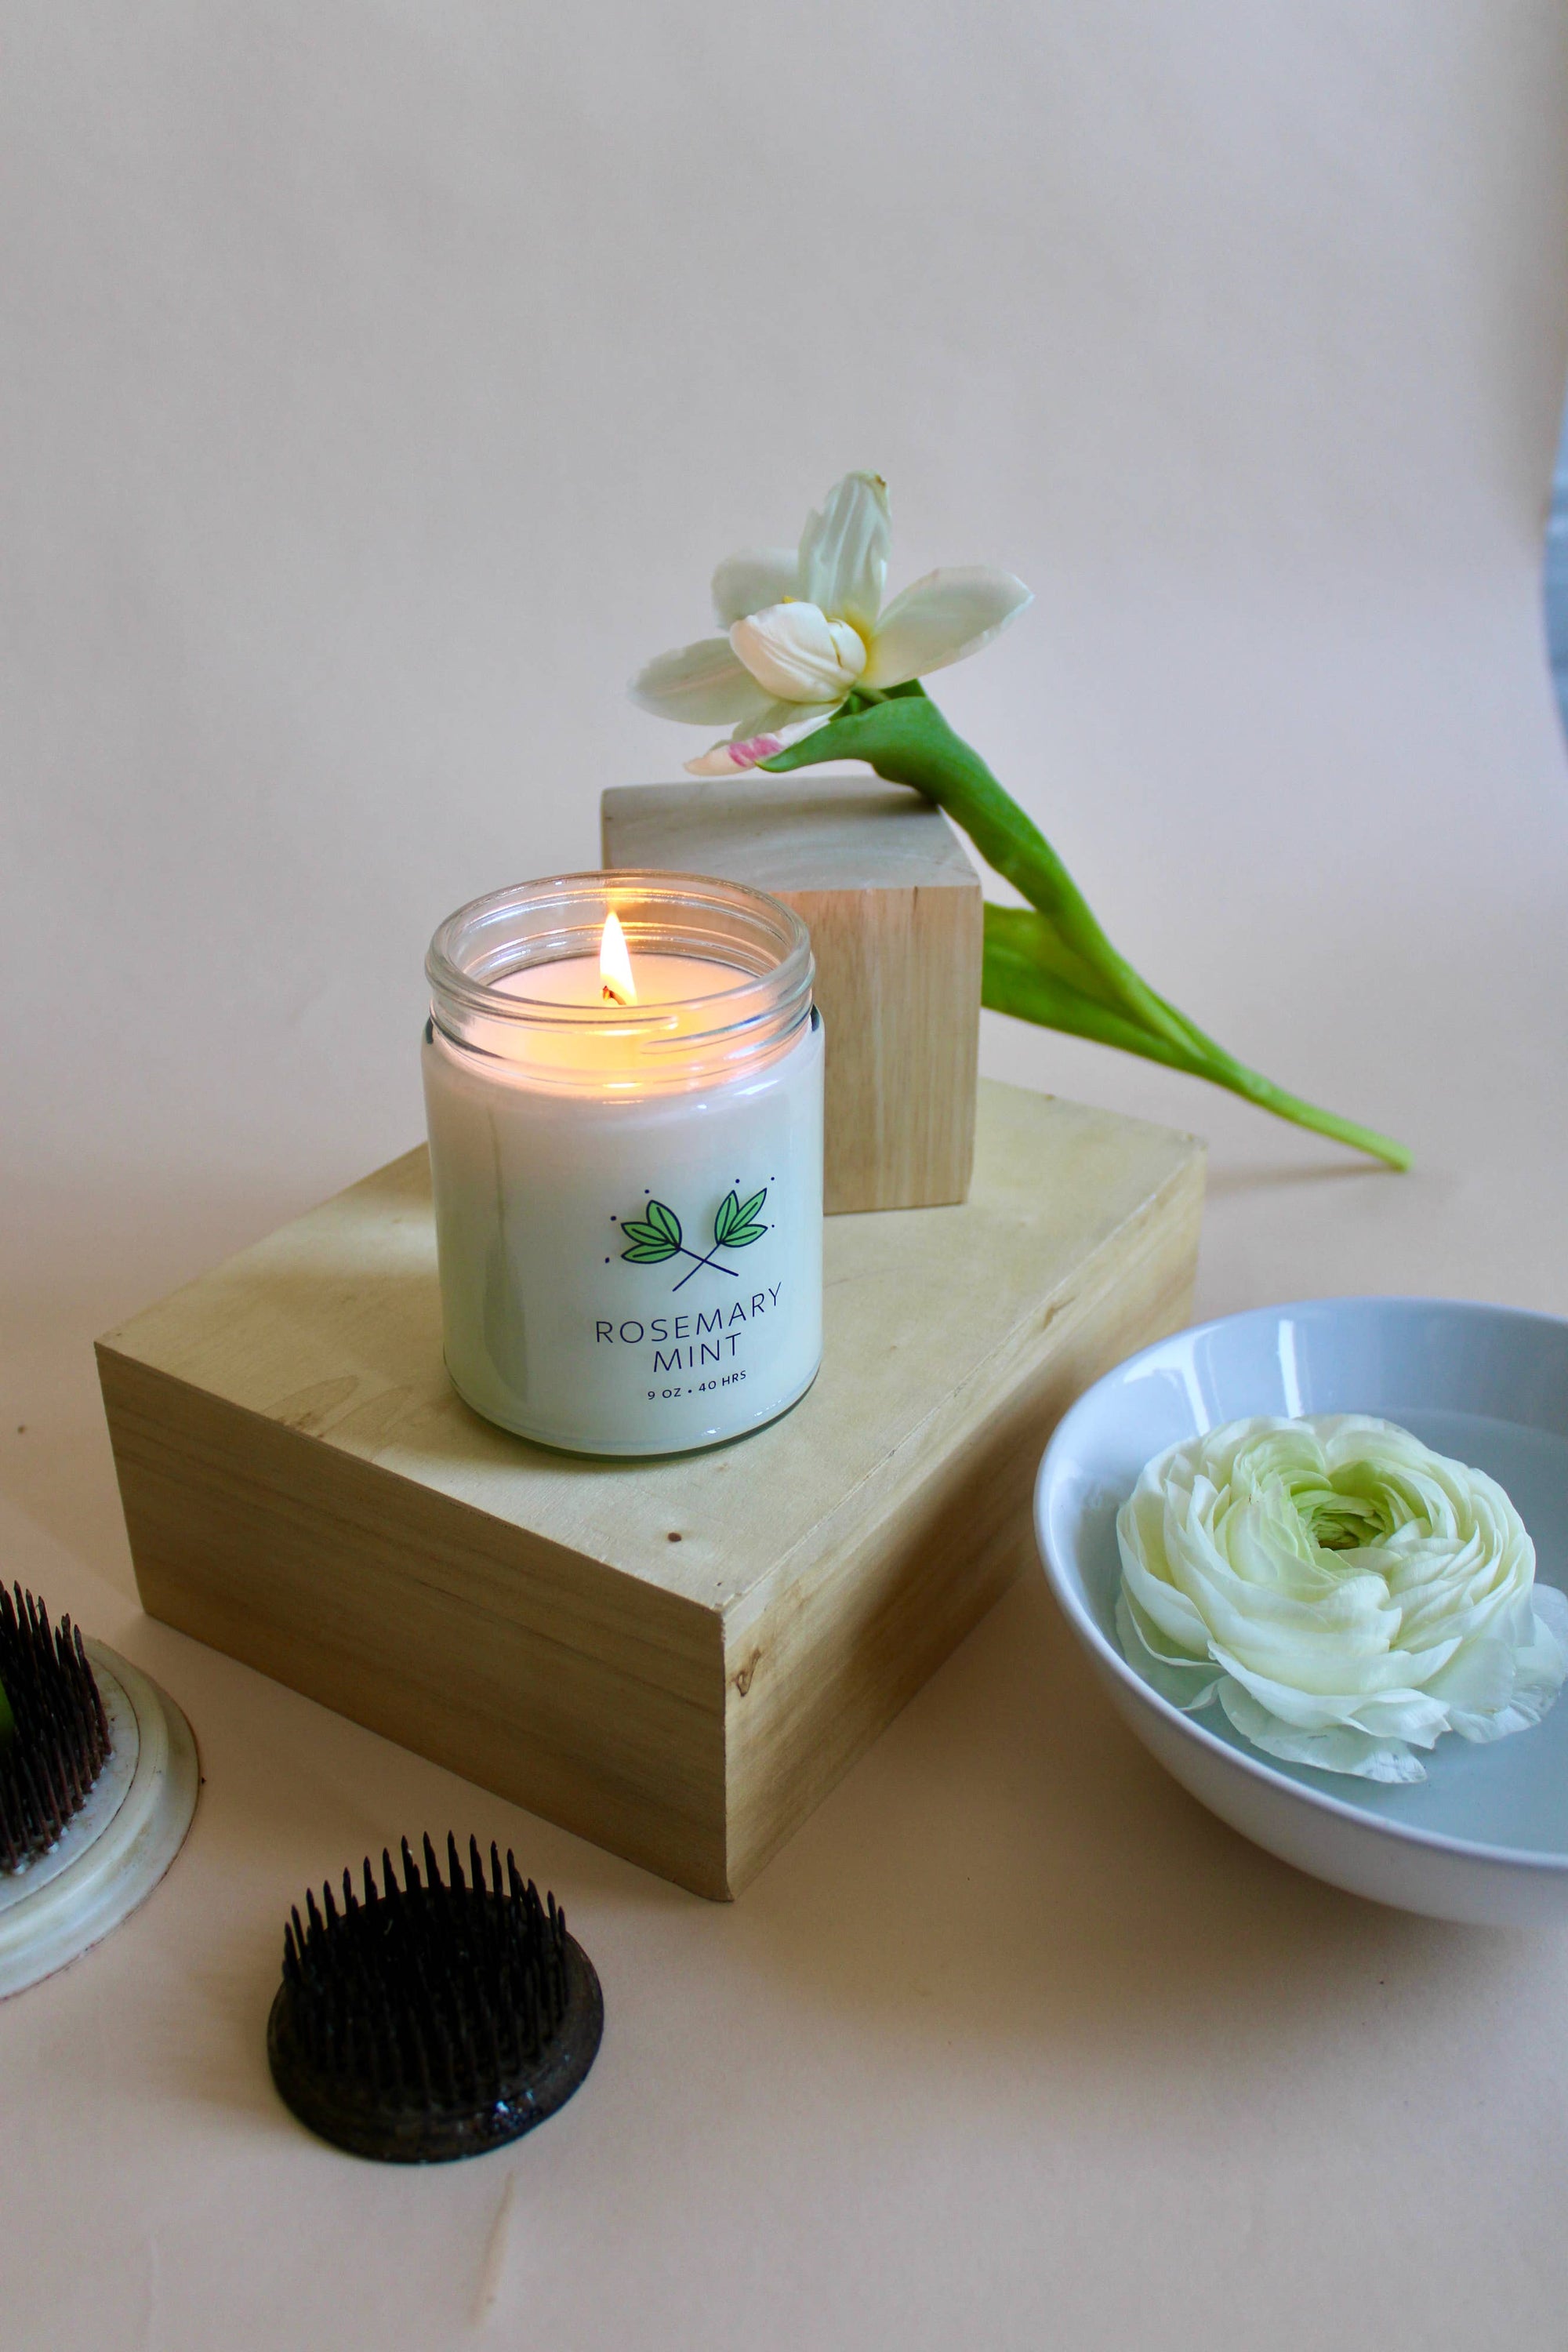 Rosemary Mint Signature Soy Wax Candle Jar